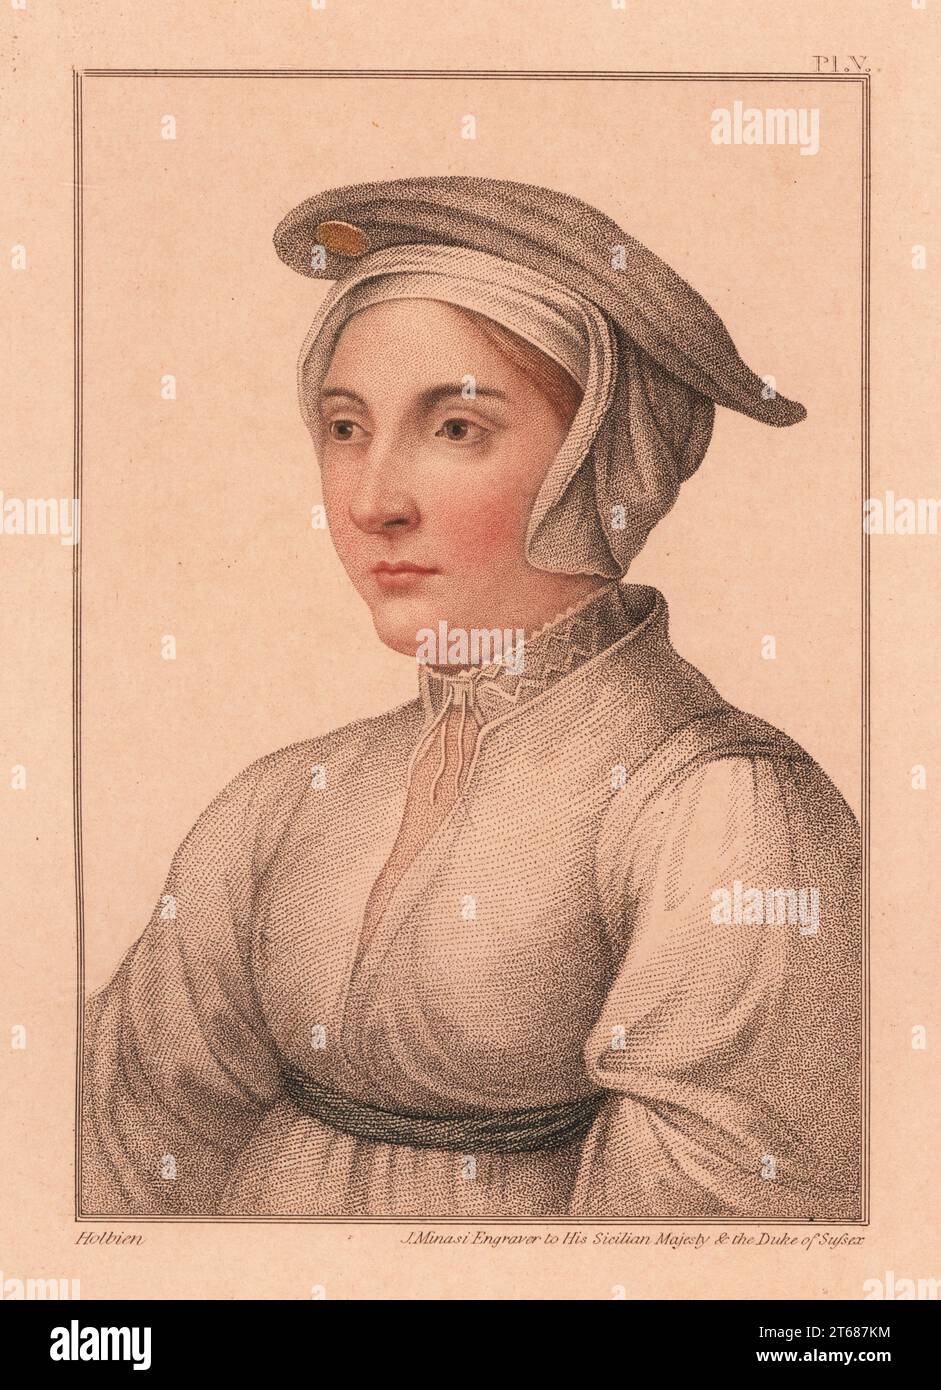 Portrait of unknown woman, court of King Henry VIII, c. 1532. Handcoloured copperplate stipple engraving by James Minasi after a portrait by Hans Holbein the Younger from Imitations of Original Drawings by Hans Holbein, John Chamberlaine, London, 1812. Stock Photo